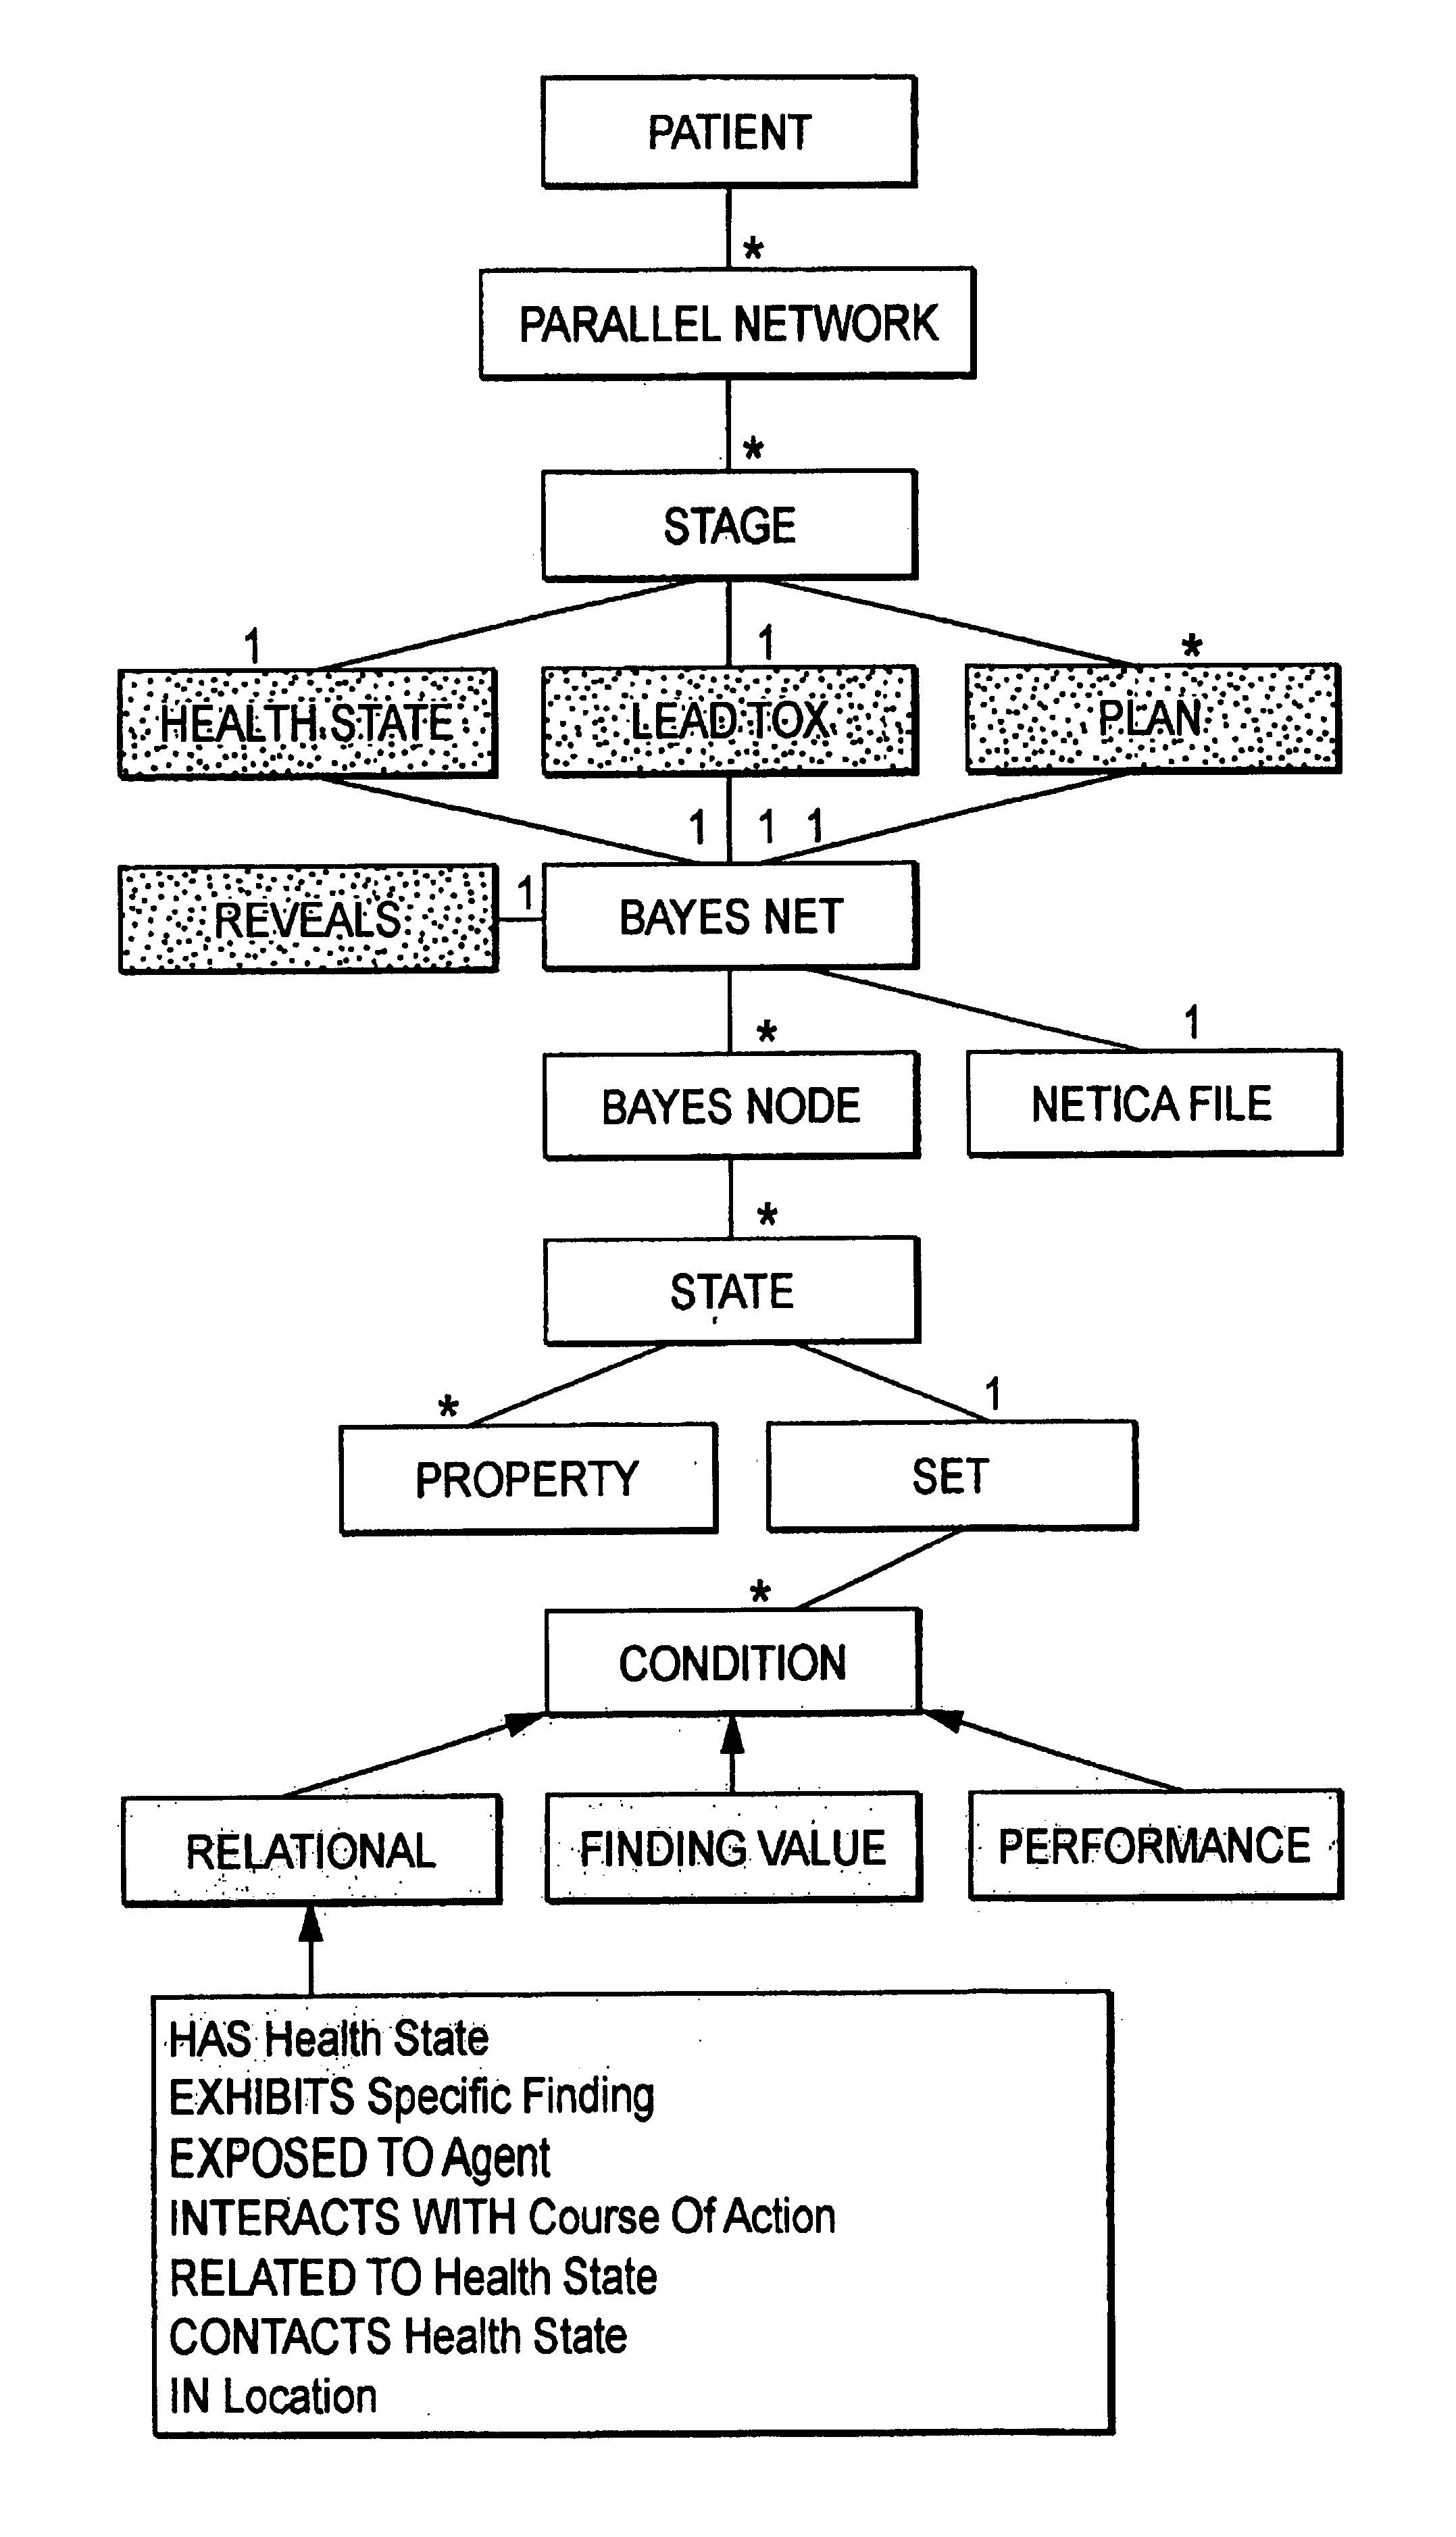 Computer architecture and process of patient generation, evolution, and simulation for computer based testing system using bayesian networks as a scripting language